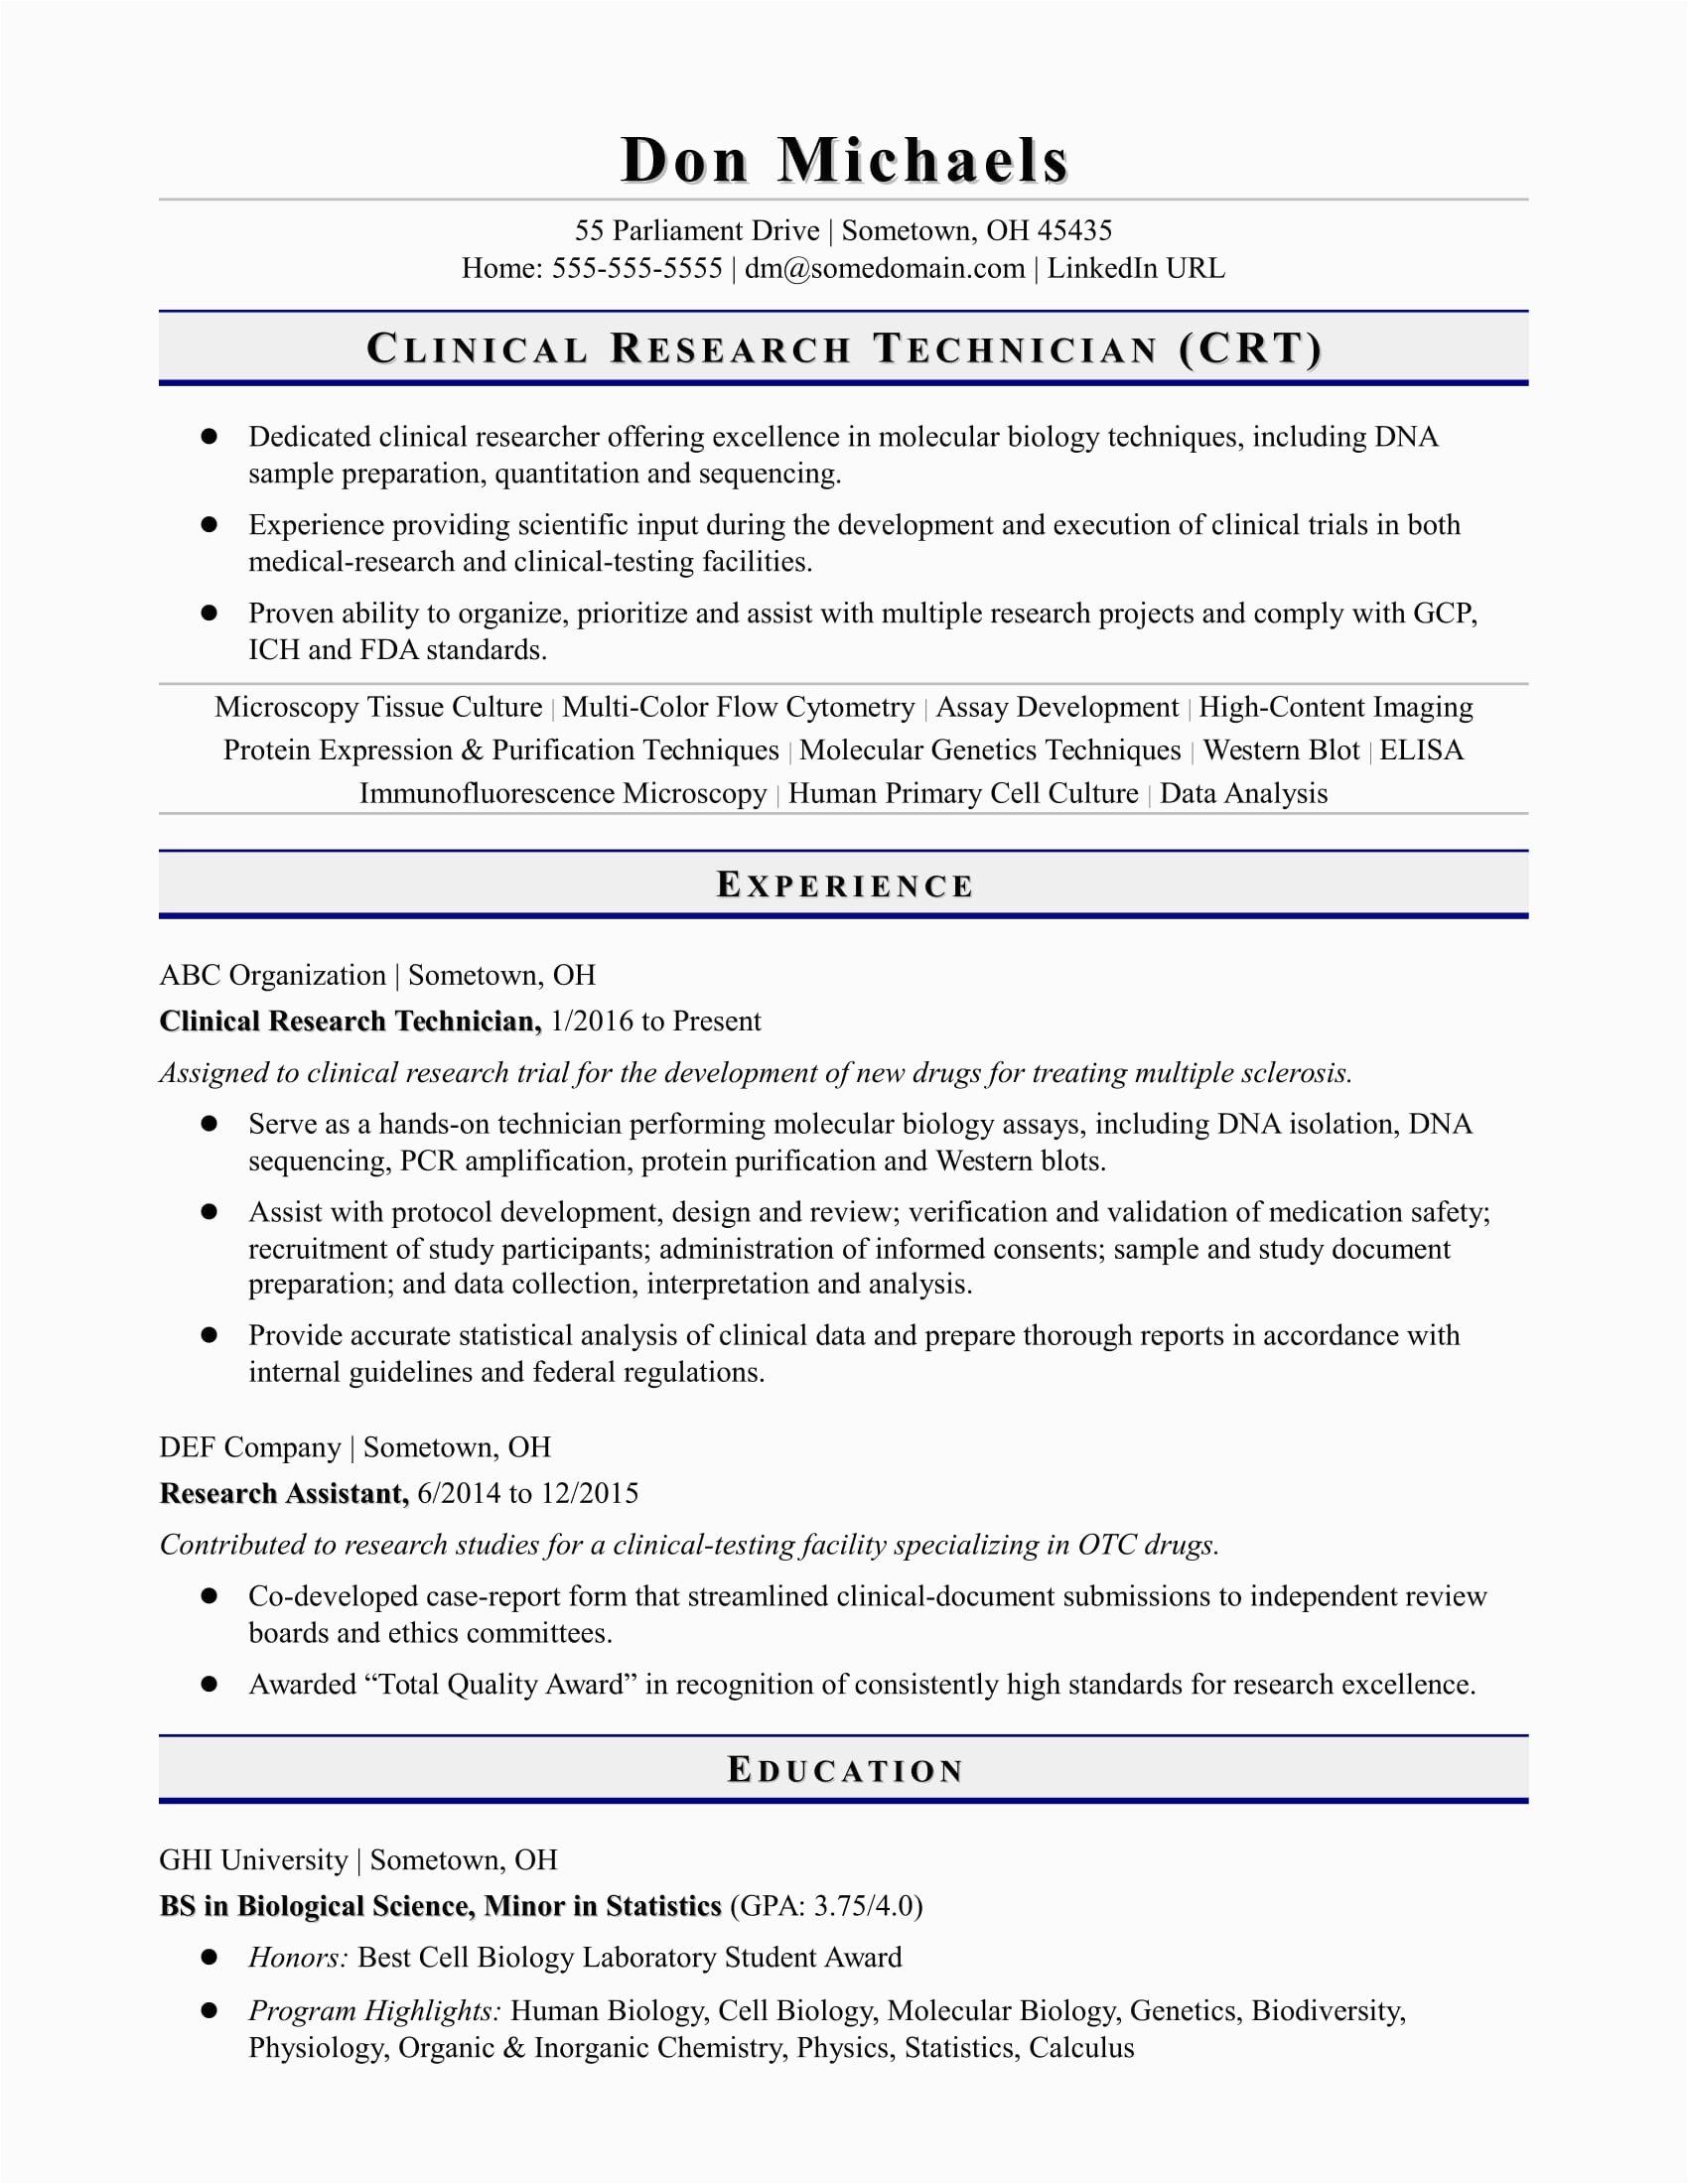 Sample Resume Objective for Research Position Entry Level Research Technician Resume Sample